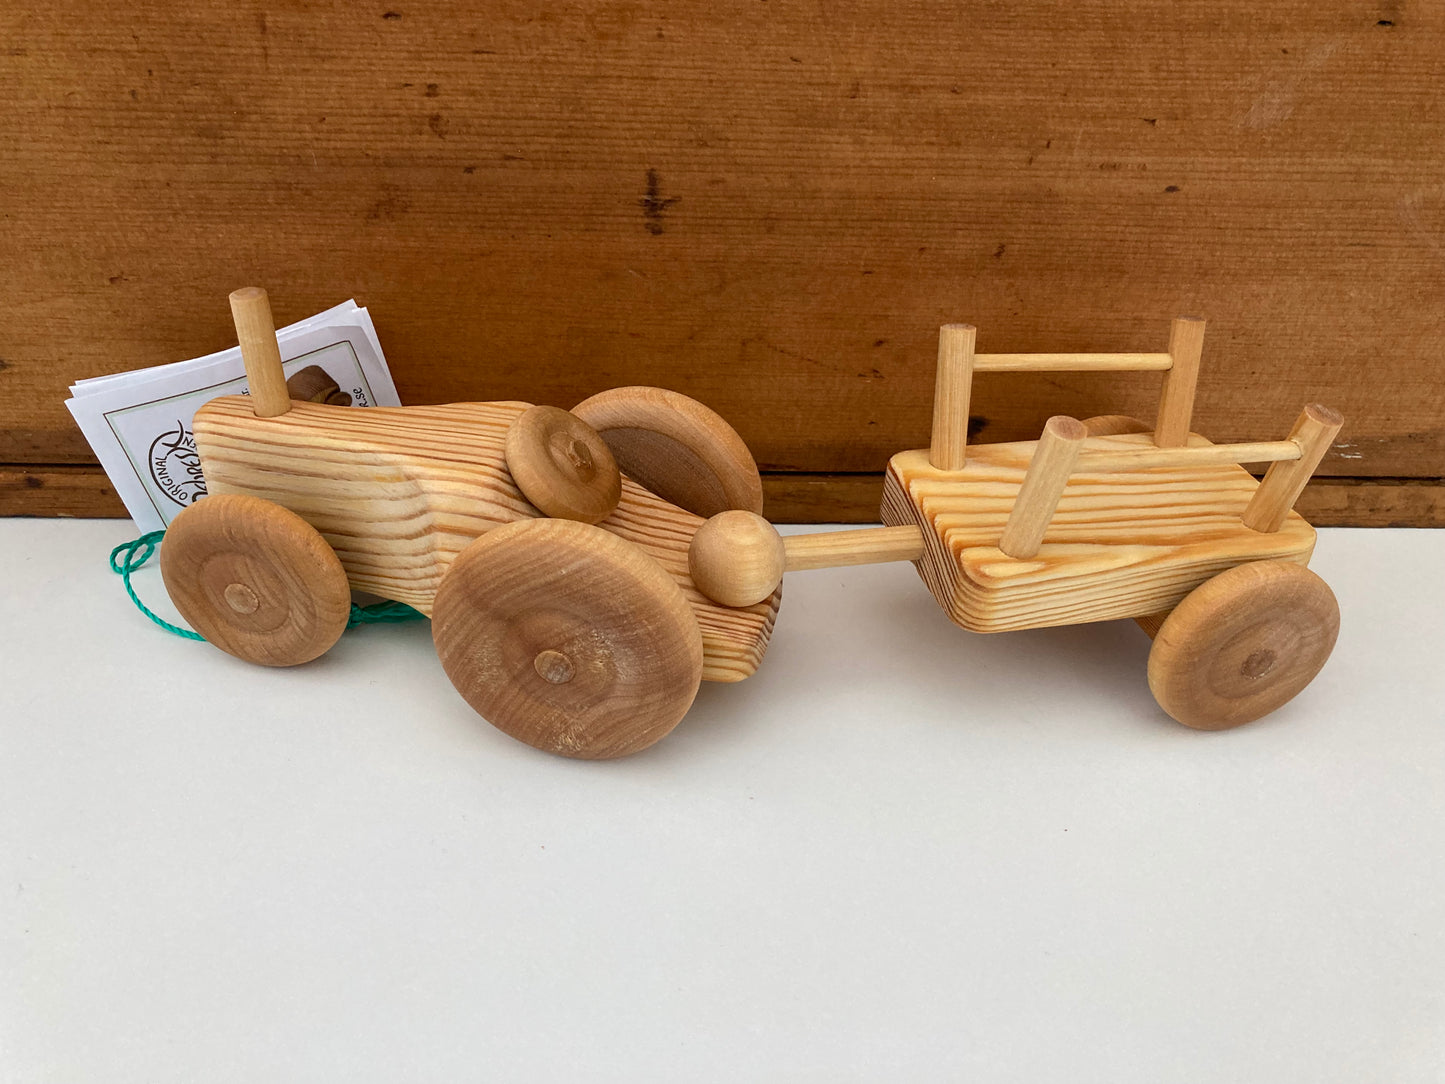 Wooden Toy - Debresk TRACTOR WITH TRAILER, Small size